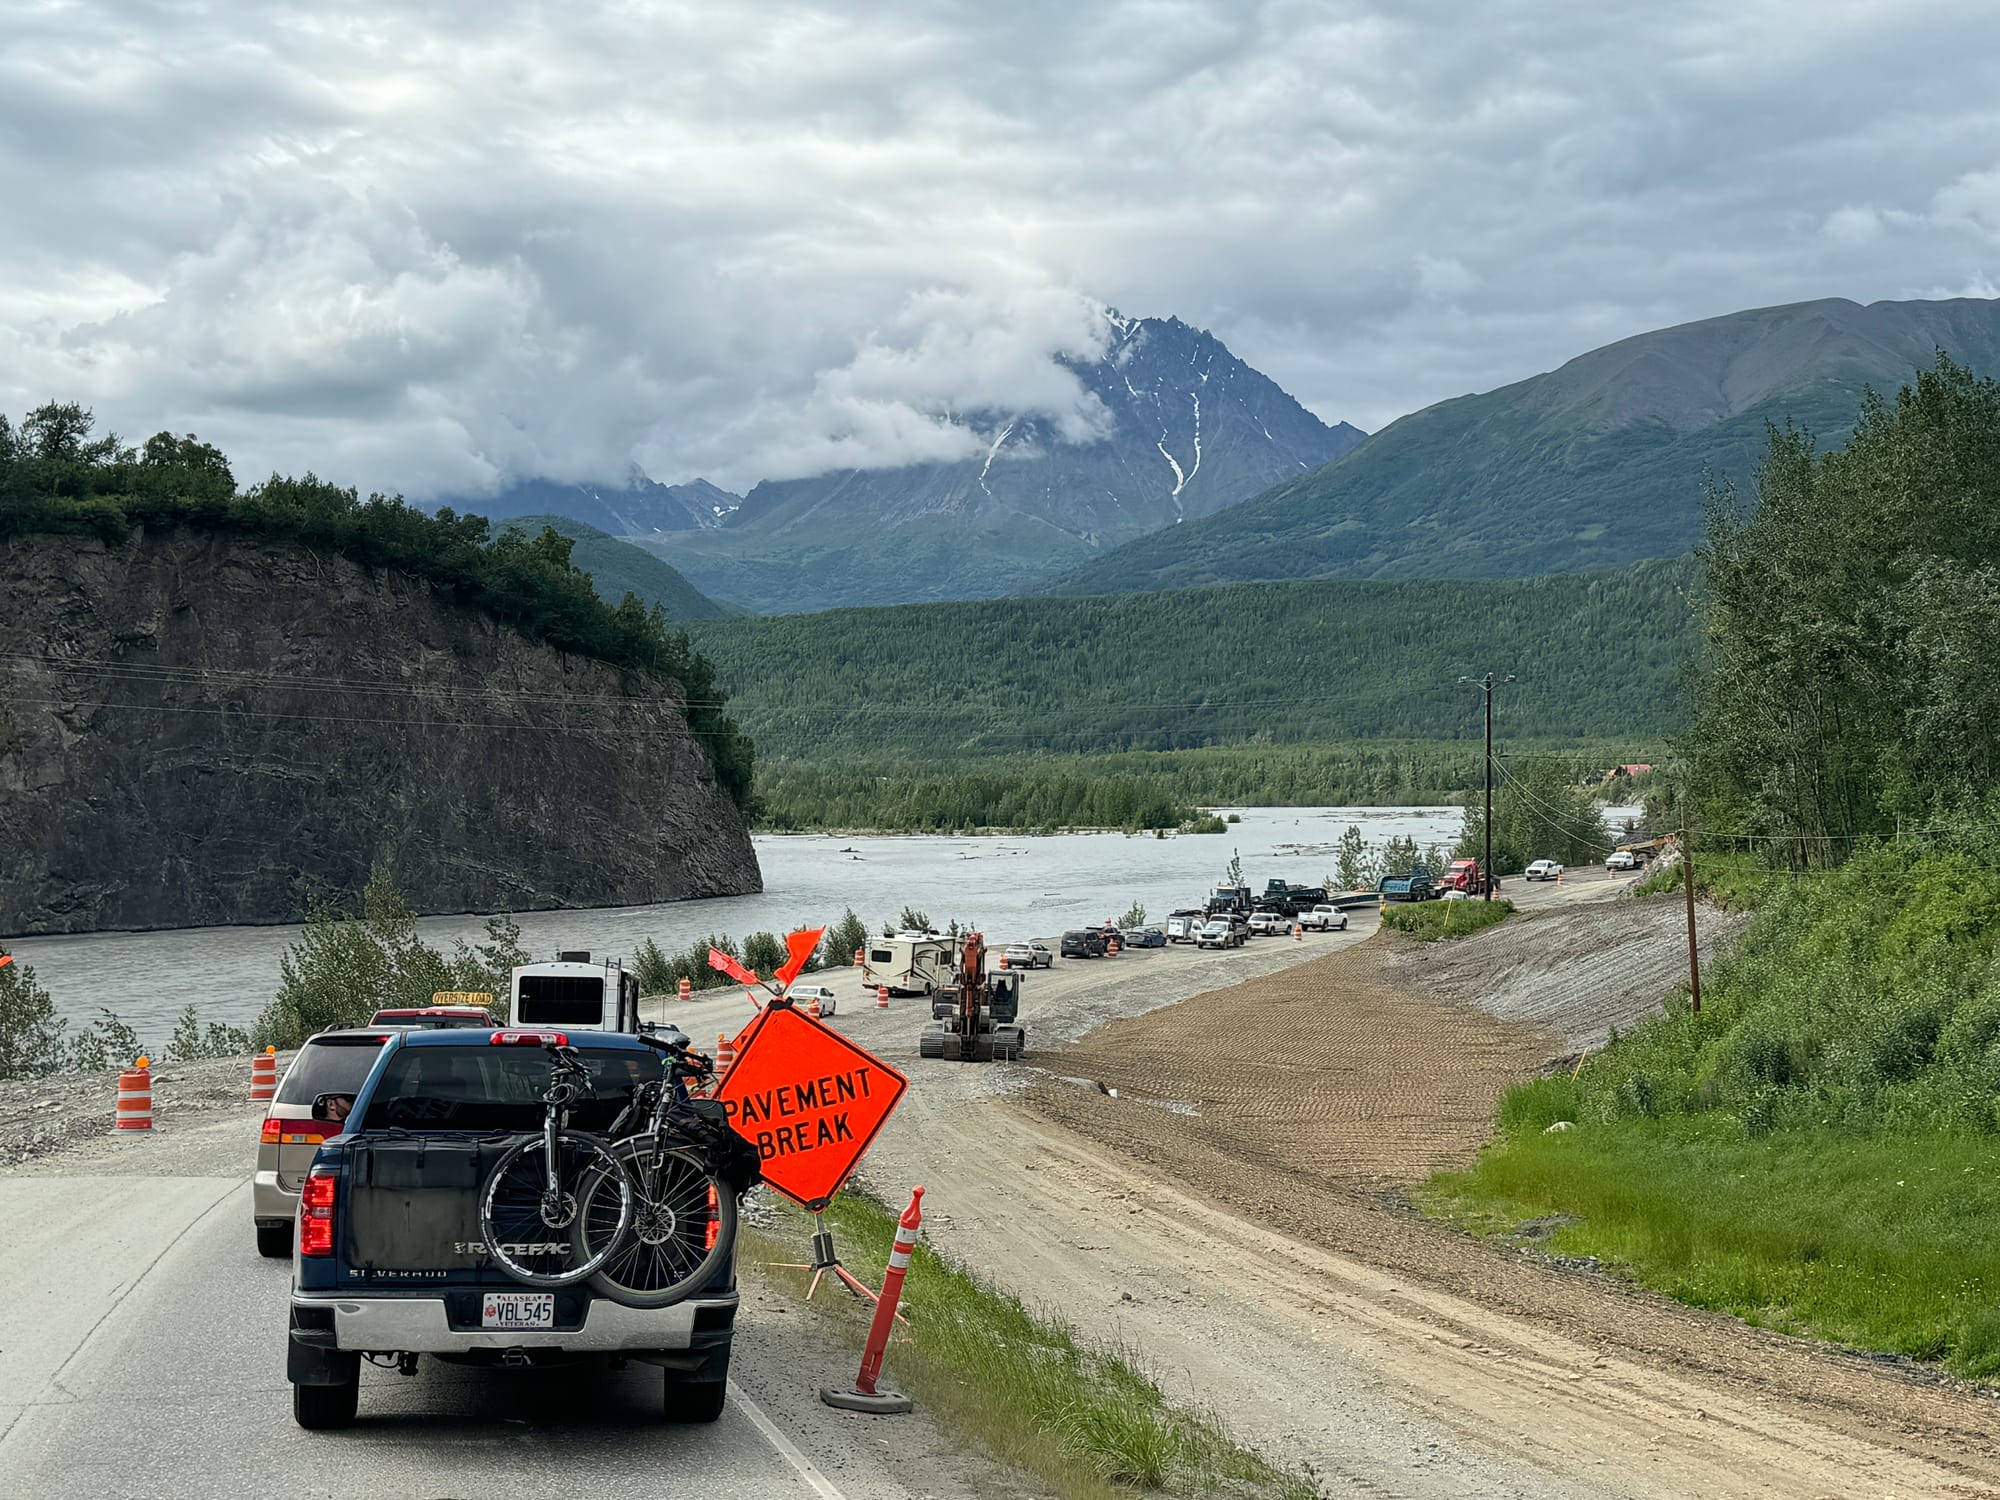 Glacier View car launch faces uncertain future due to ongoing riverbank erosion